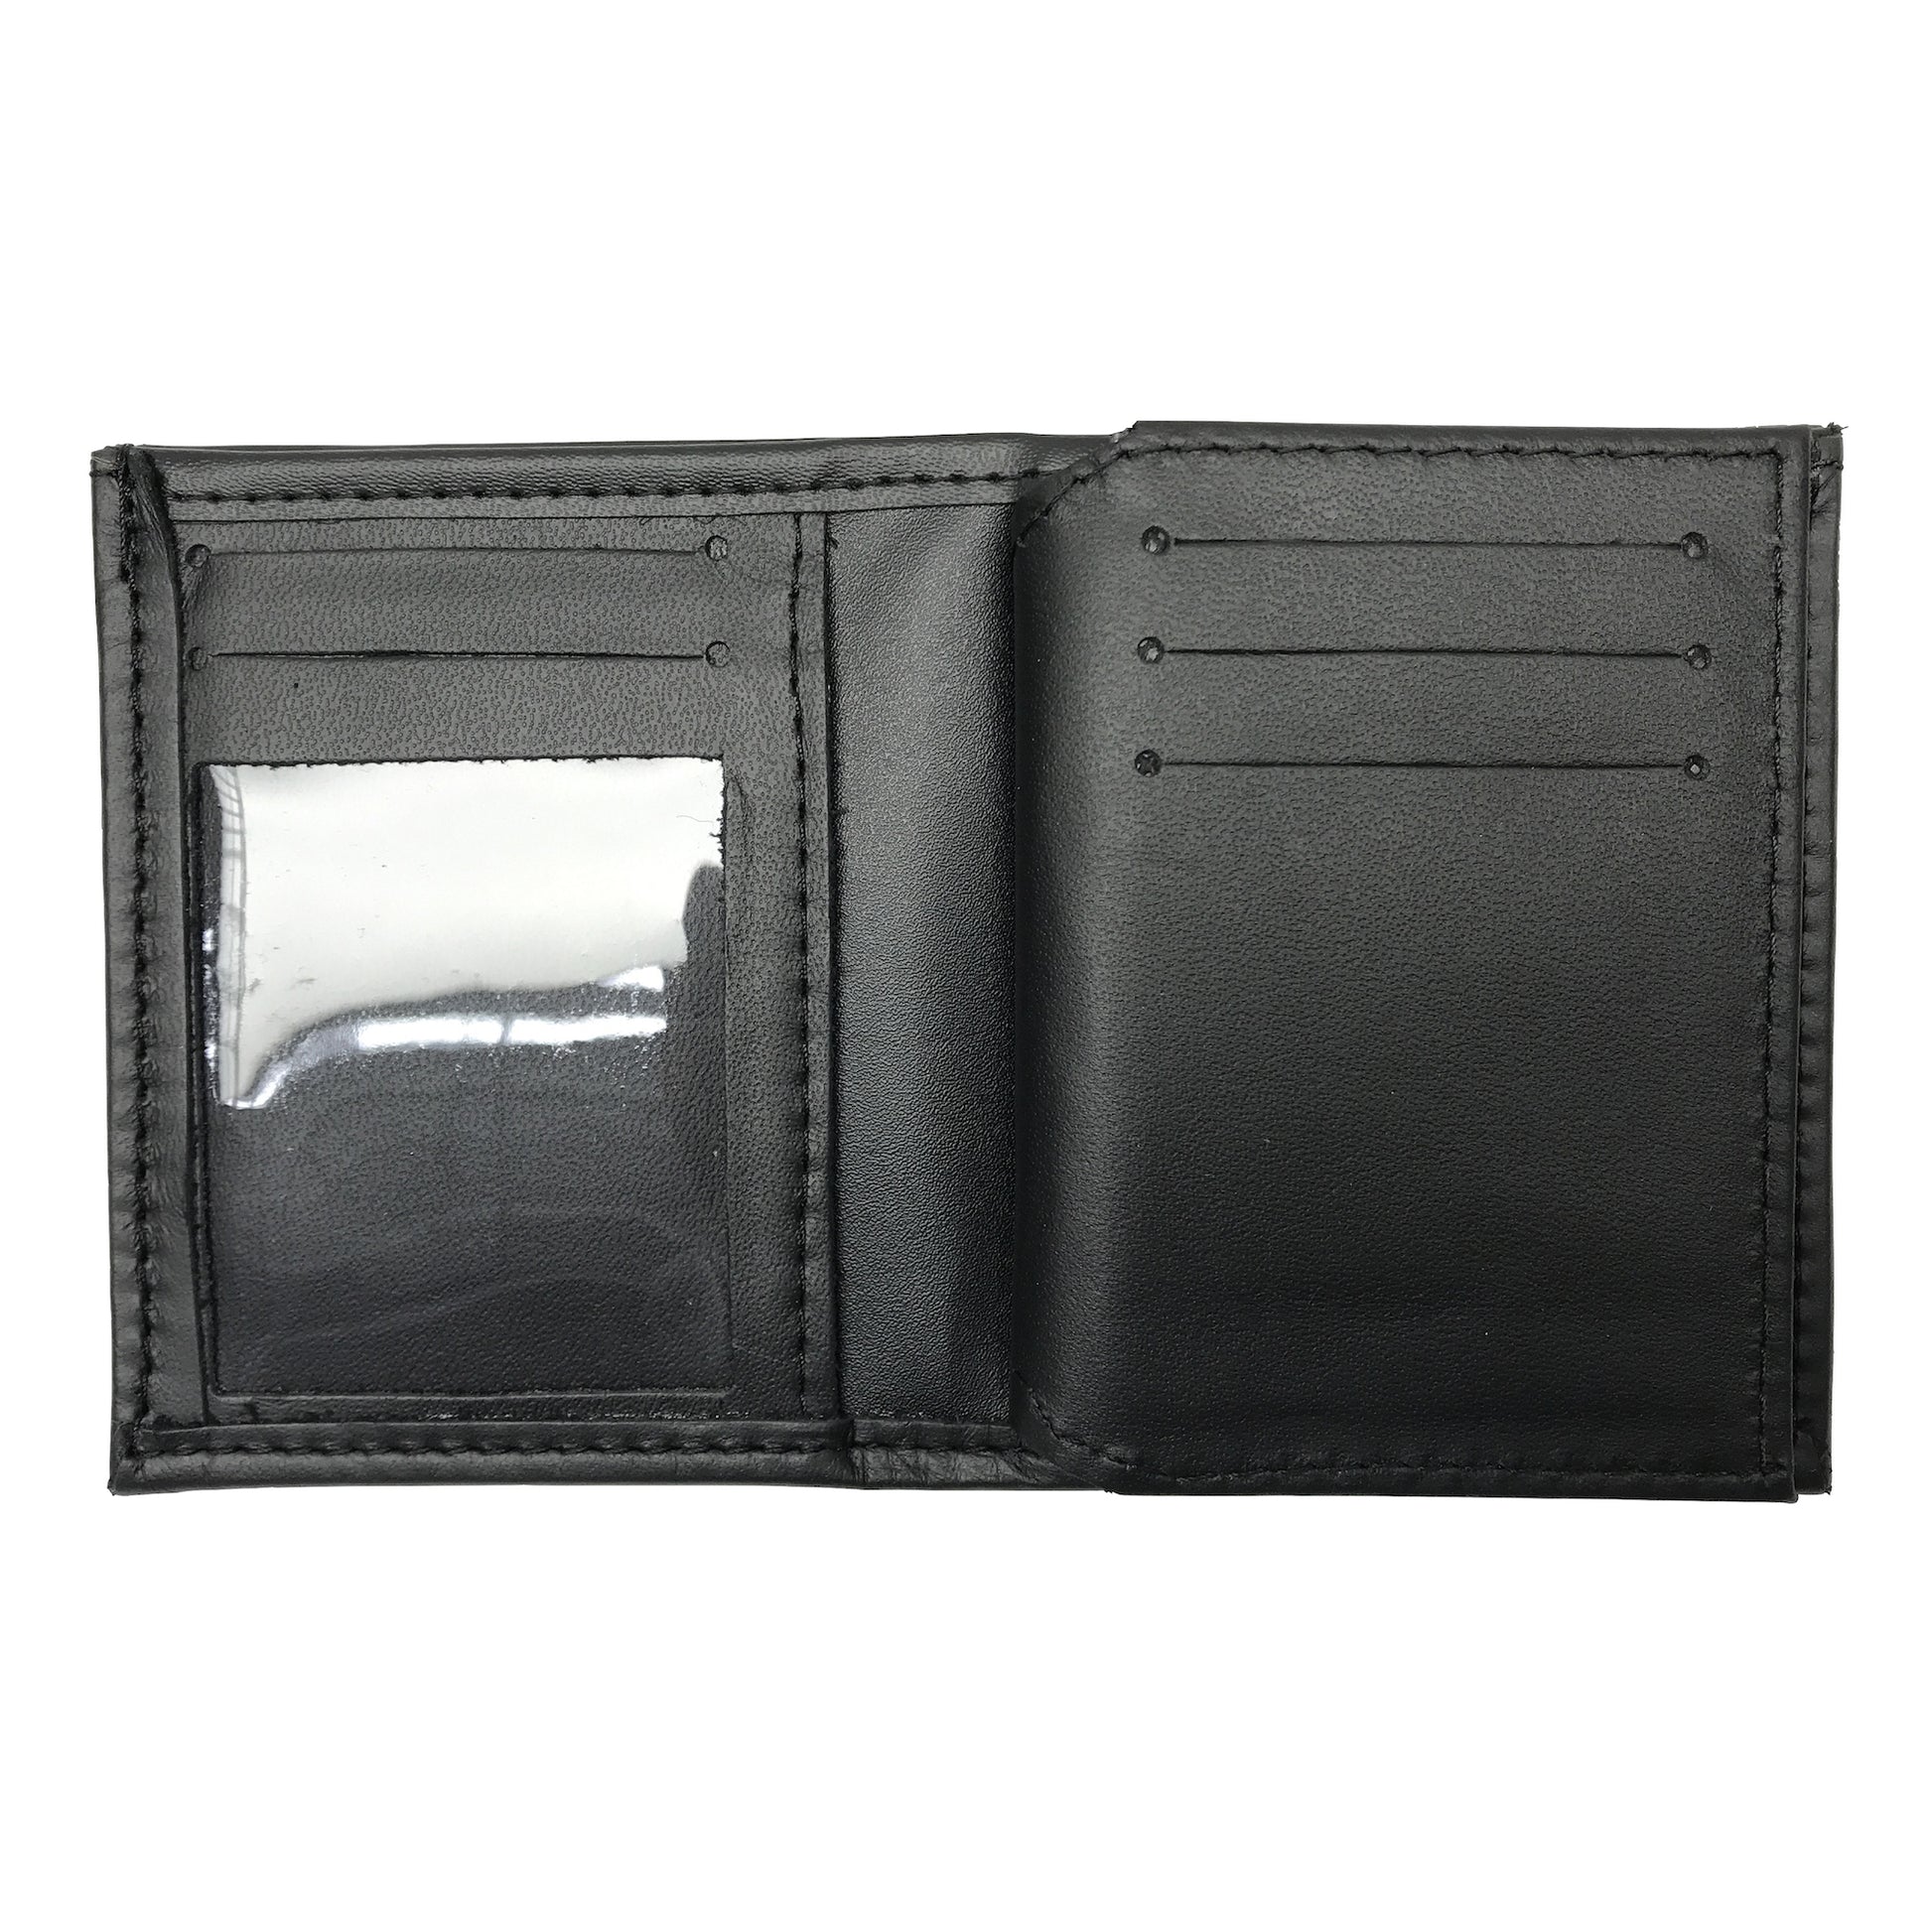 Toronto Police Badge Wallet-Perfect Fit-911 Duty Gear Canada